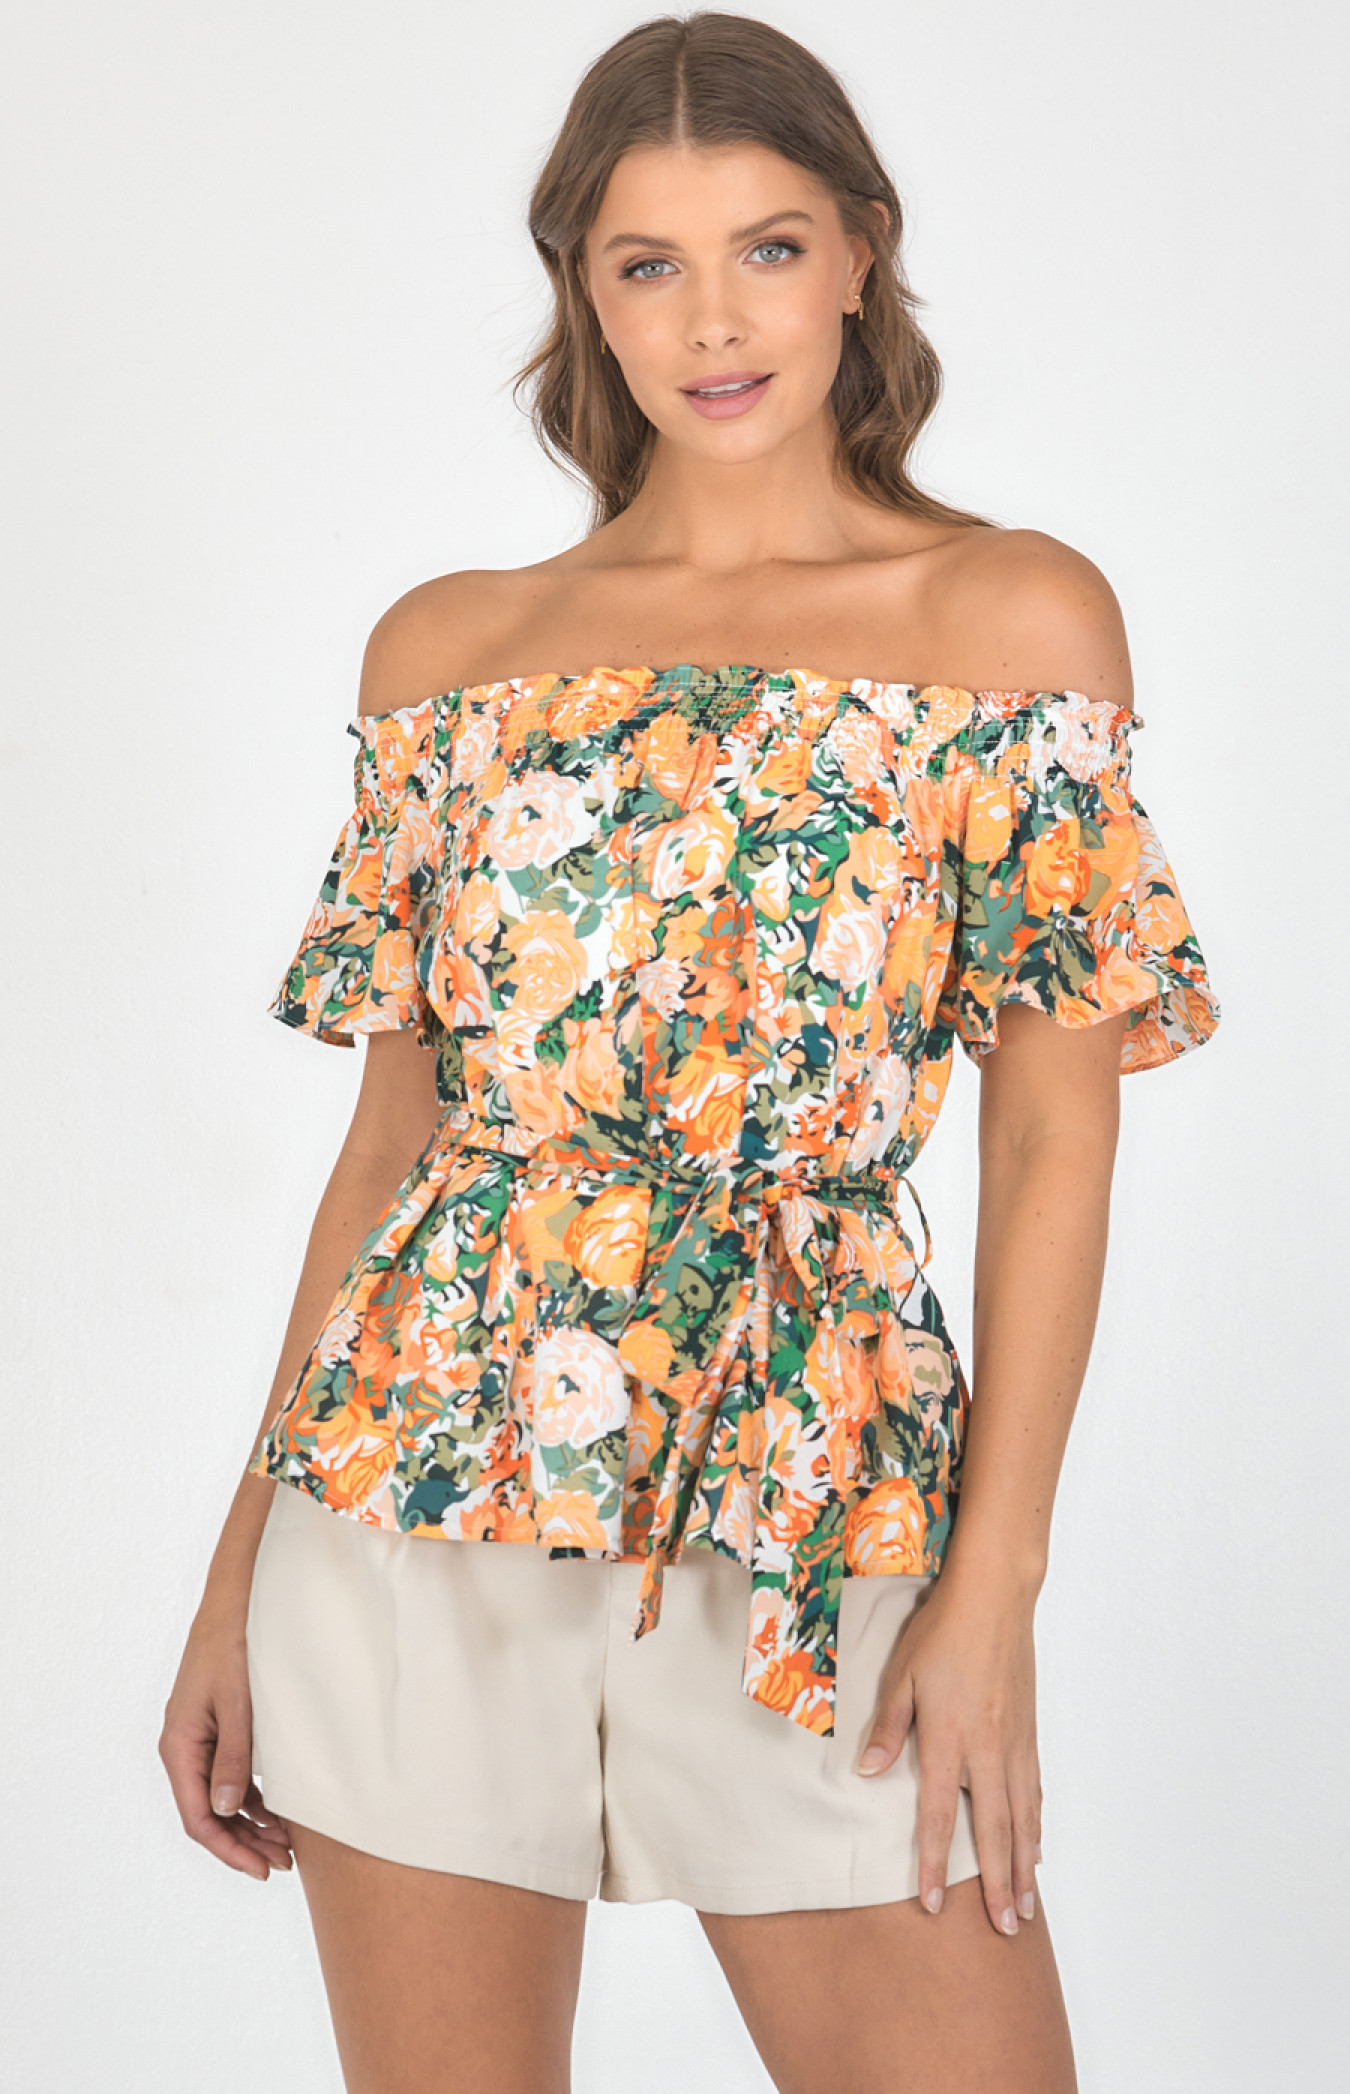 Floral Print Off the Shoulder Top with Belt (STO582B)